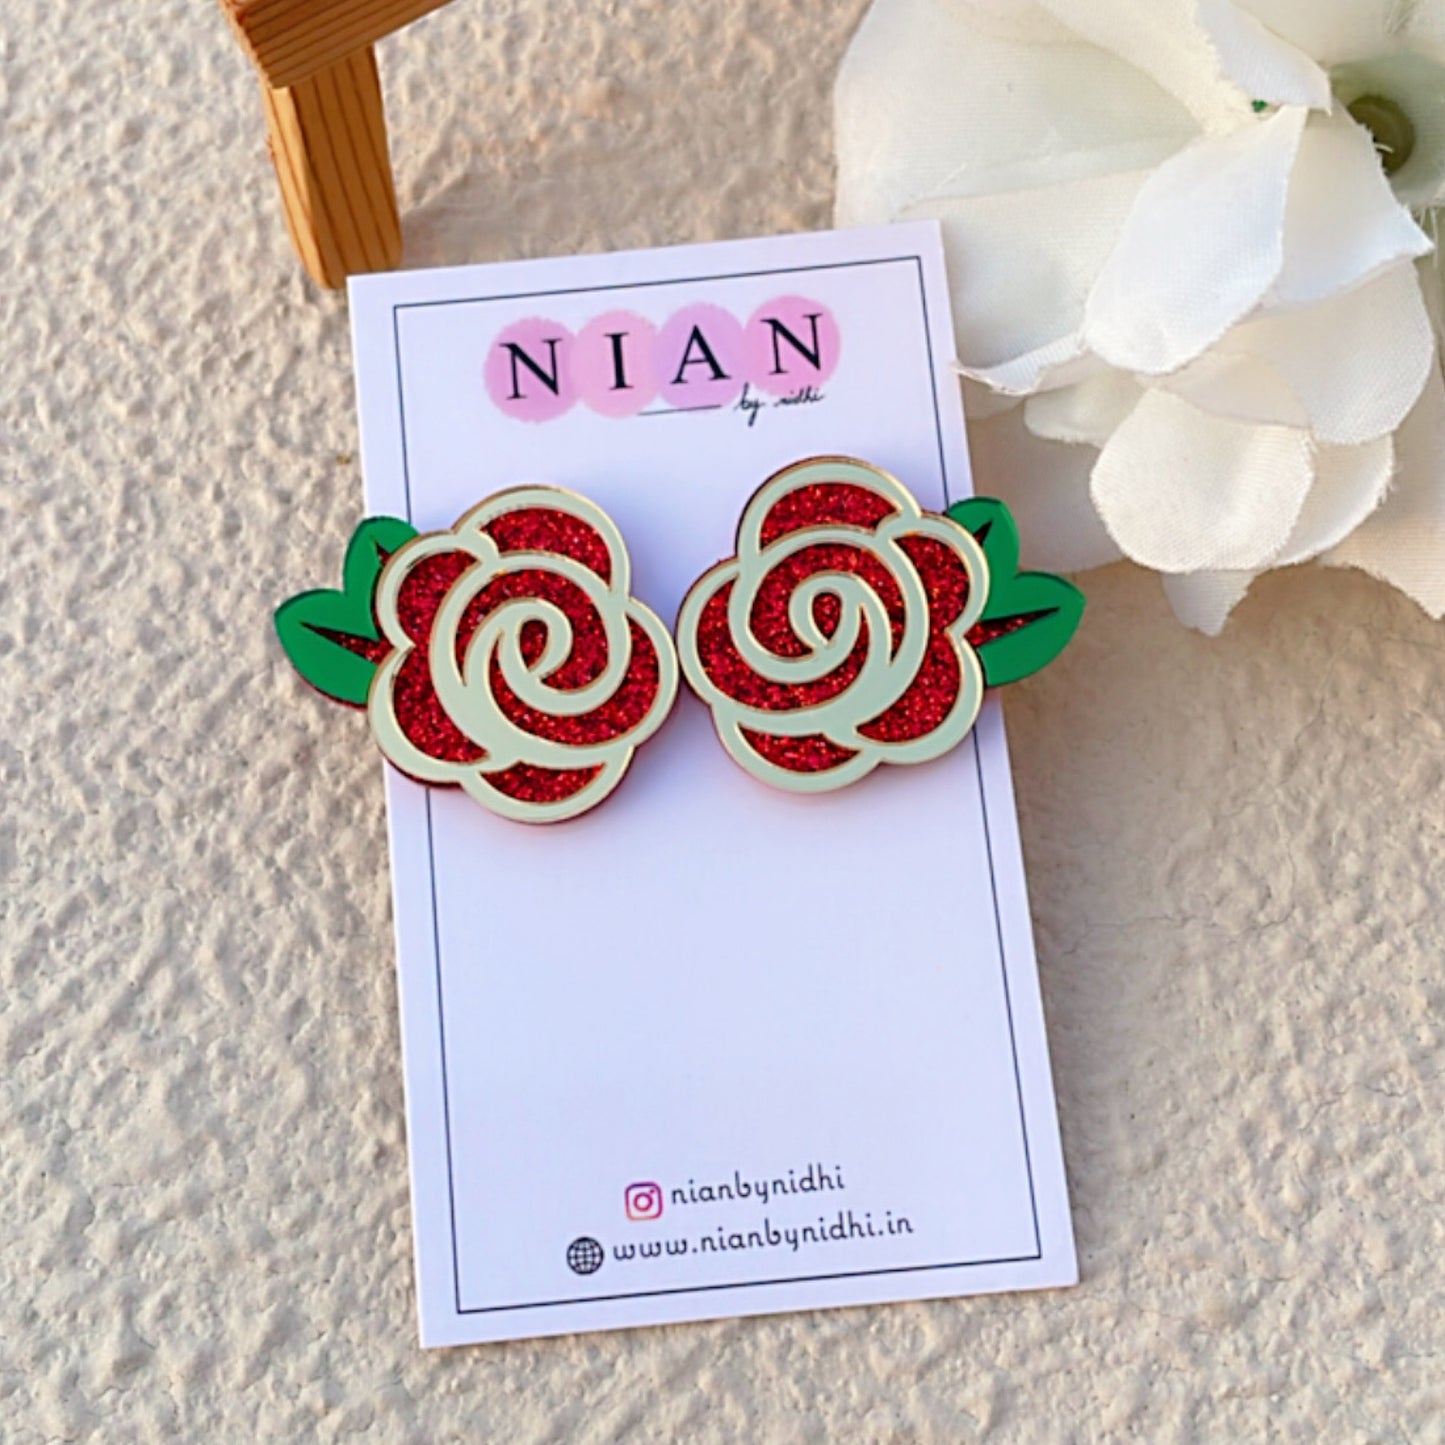 Ravishing Rose Earrings - Shimmer Red, Glossy Golden and Green - Nian by Nidhi - placed in a brown background